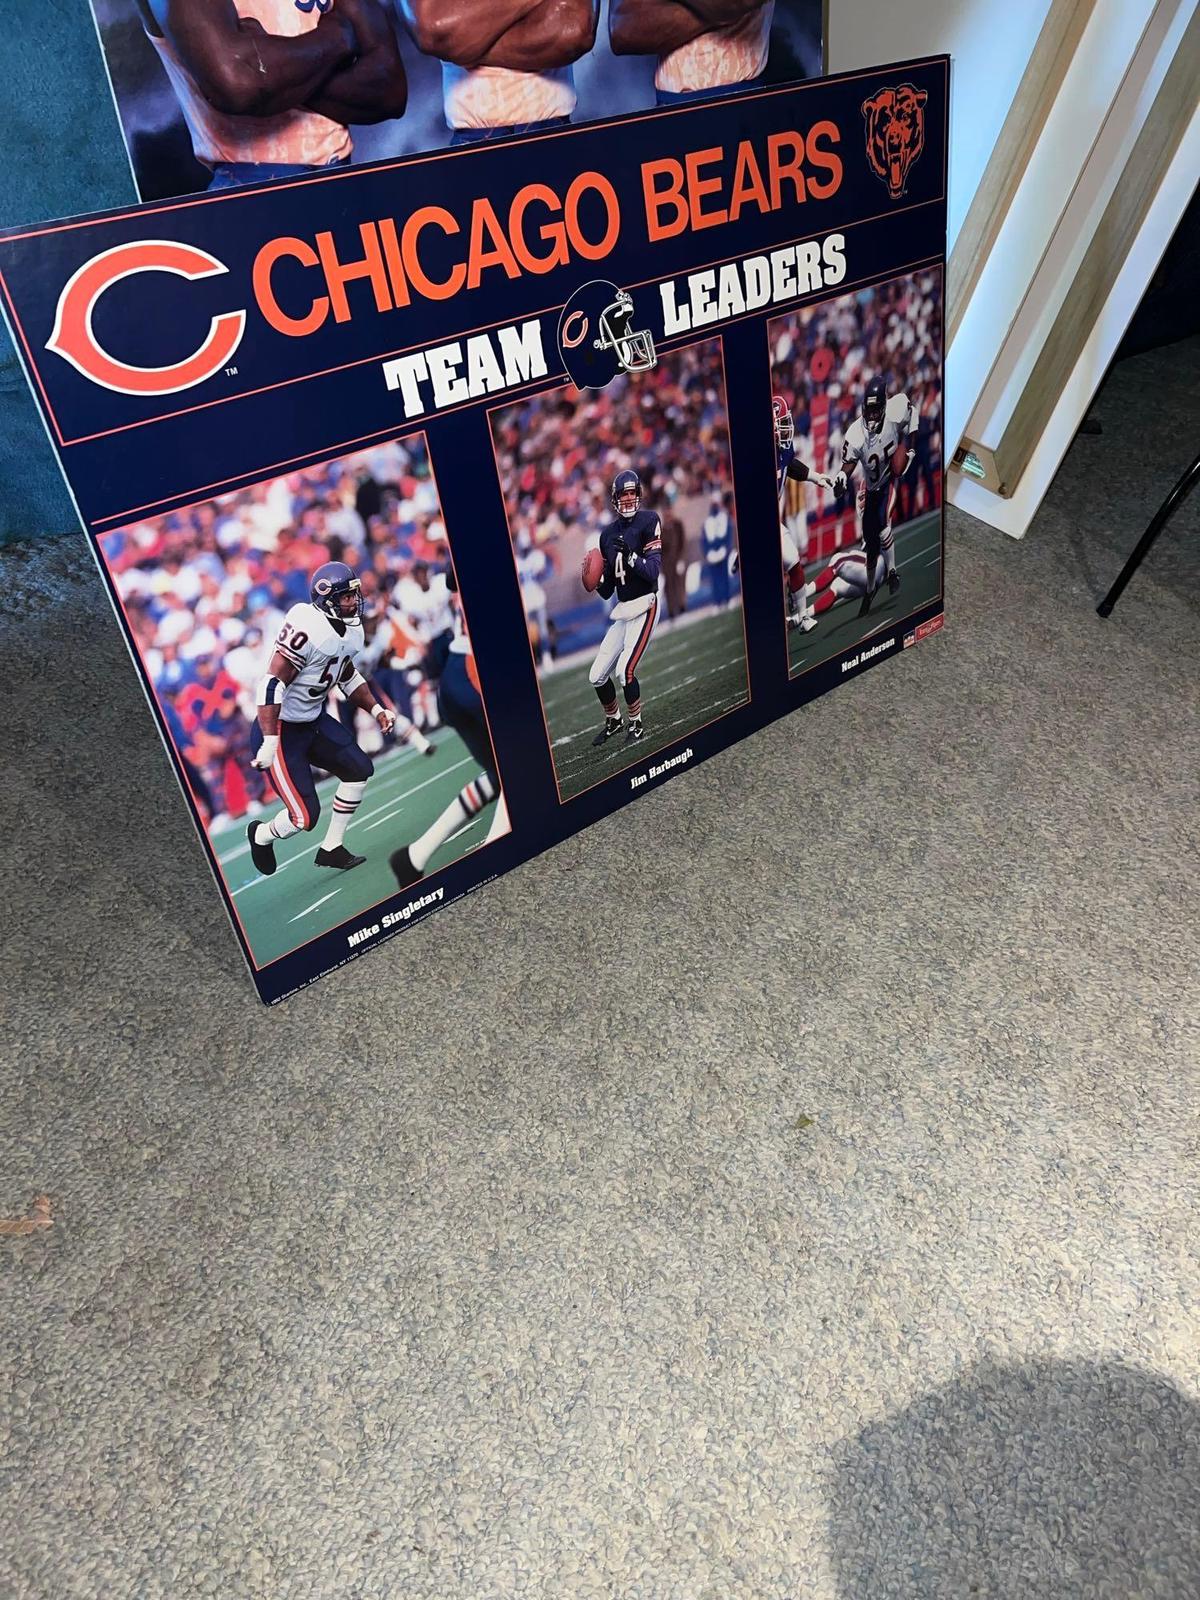 Chicago Bears Team Leaders Mike Singletary Jim Harbaugh Neal Anderson poster